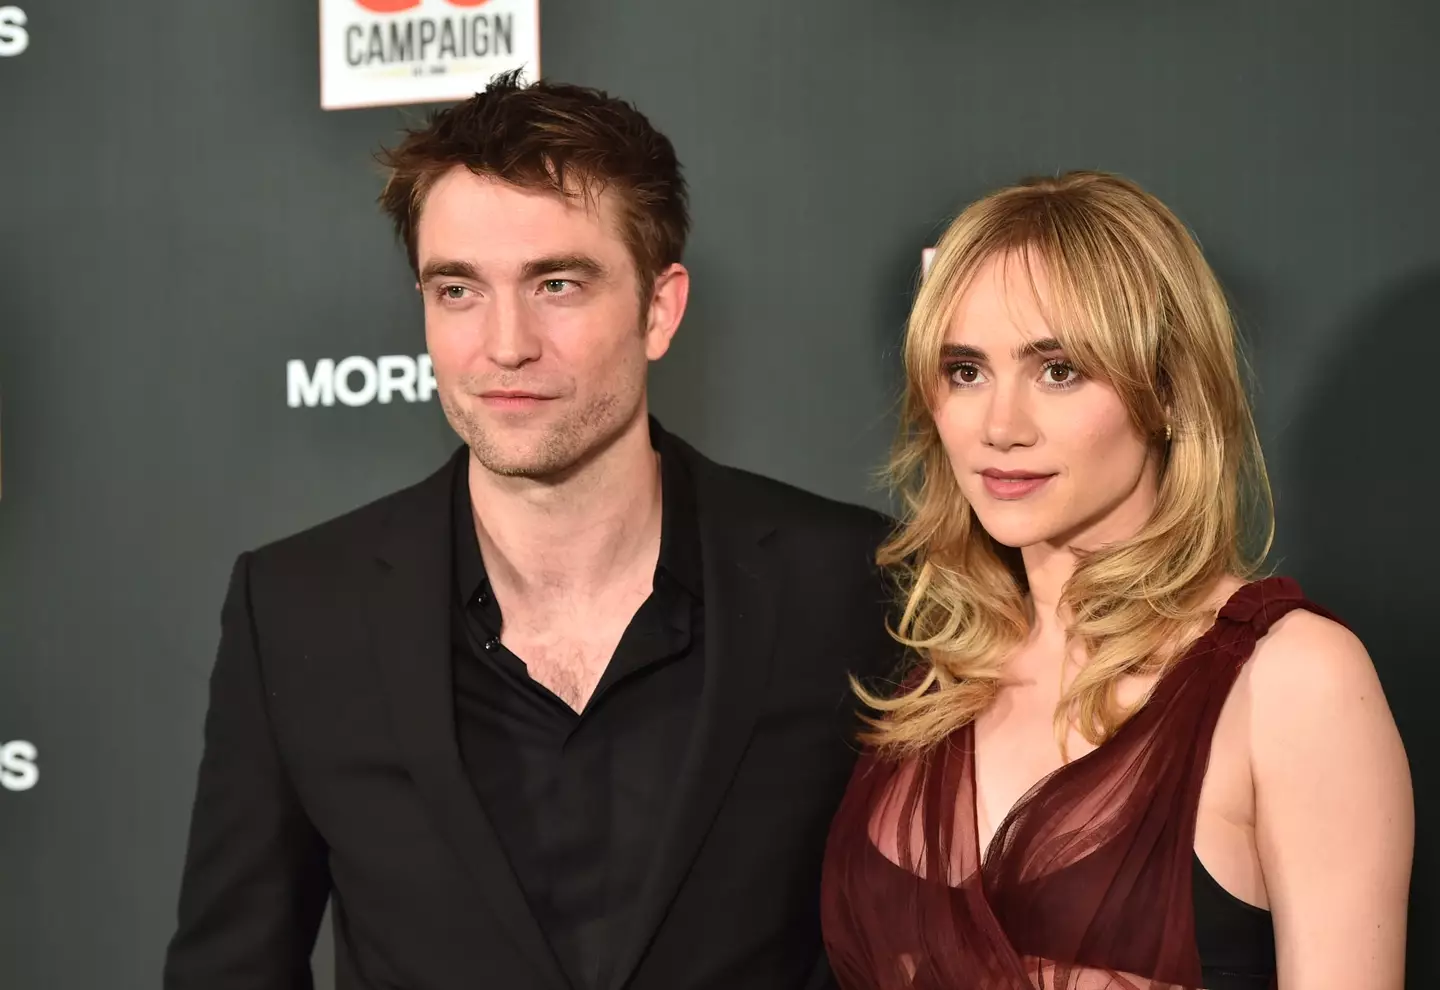 Suki Waterhouse and Robert Pattinson are expecting a child together.